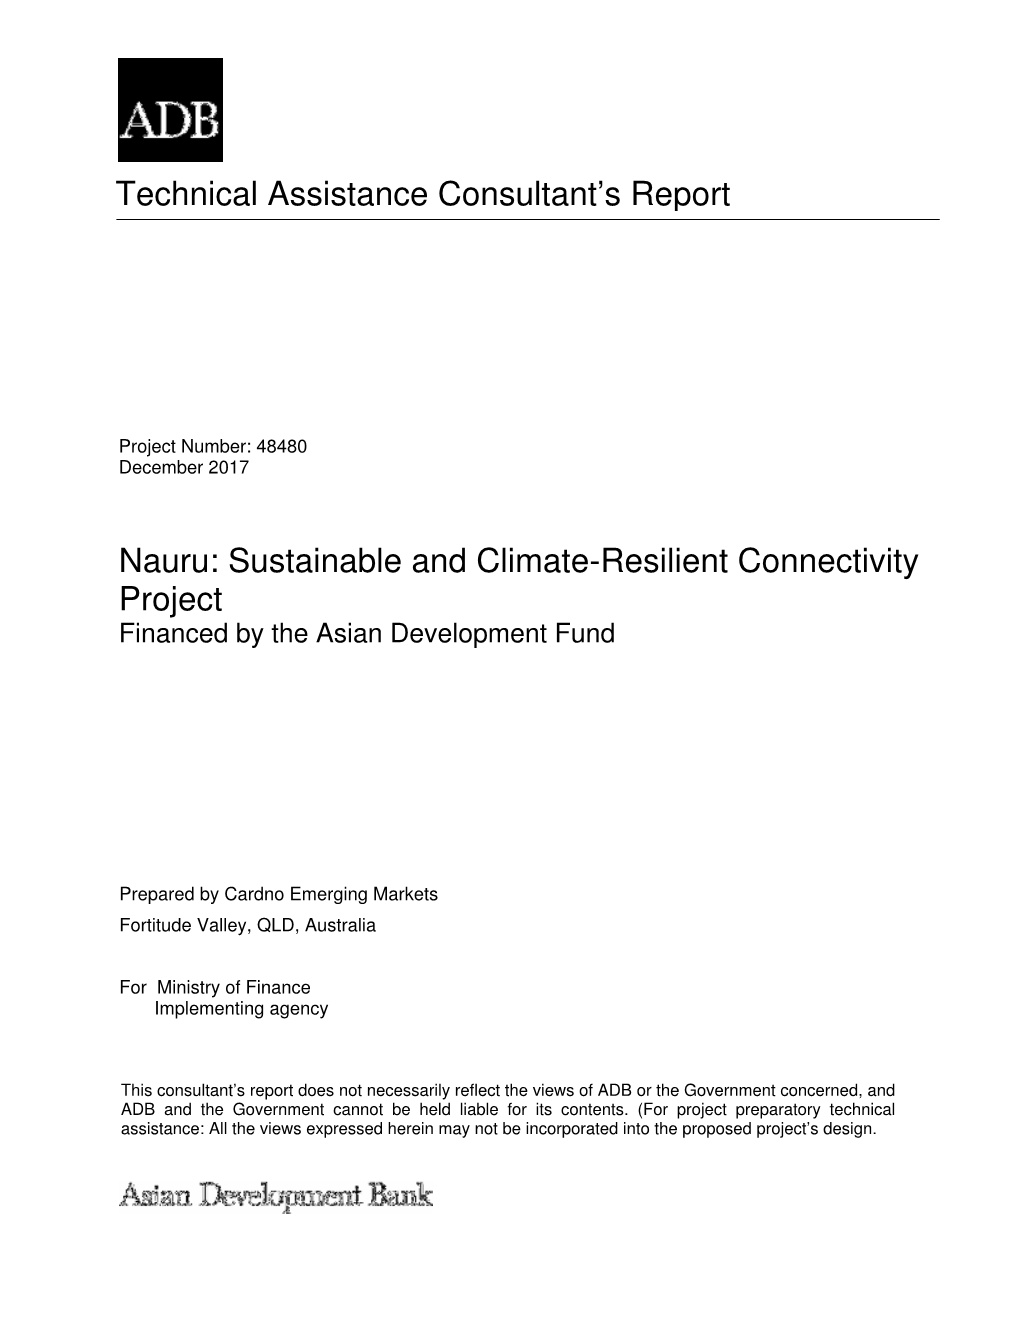 Technical Assistance Consultant's Report Nauru: Sustainable and Climate-Resilient Connectivity Project